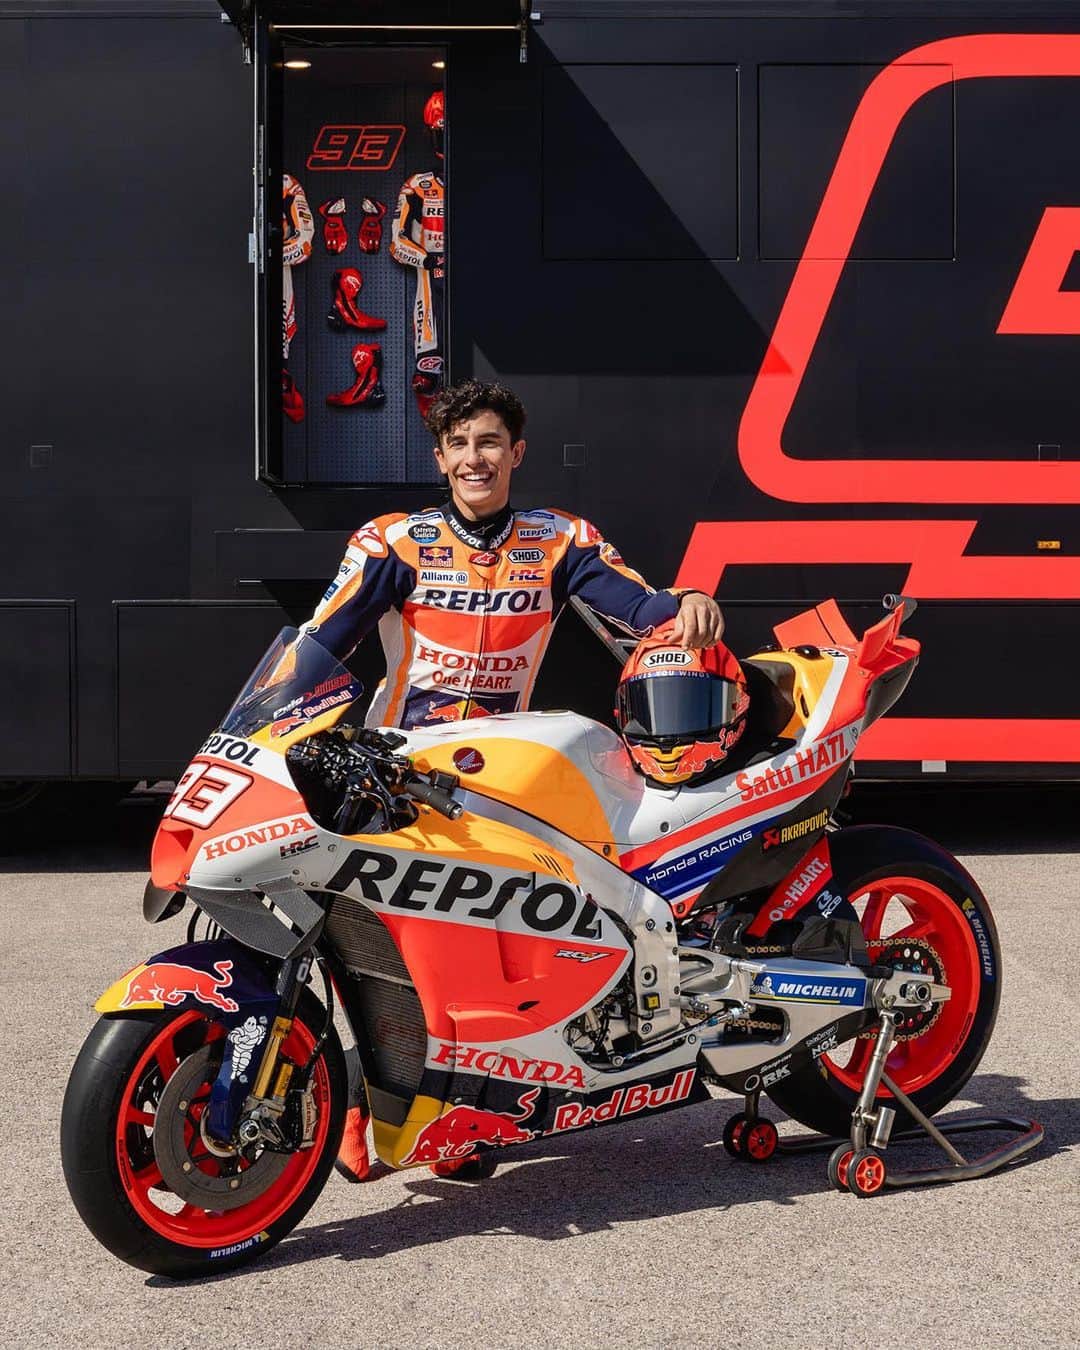 Airbnbのインスタグラム：「For the first time ever, @motogp fans will be able to sleep in the heart of the action at the Catalan Grand Prix— because @marcmarquez93 is hosting an overnight stay in his squad’s motorhome on Airbnb.  In addition to staying in an area normally reserved for professional riders, guests will be able to take a ride on the MotoGP simulator, get VIP seating to watch the race, and a personal guided tour of the never-before experienced pit boxes.   Booking opens on July 19th at 7PM CEST at the link in our bio.」